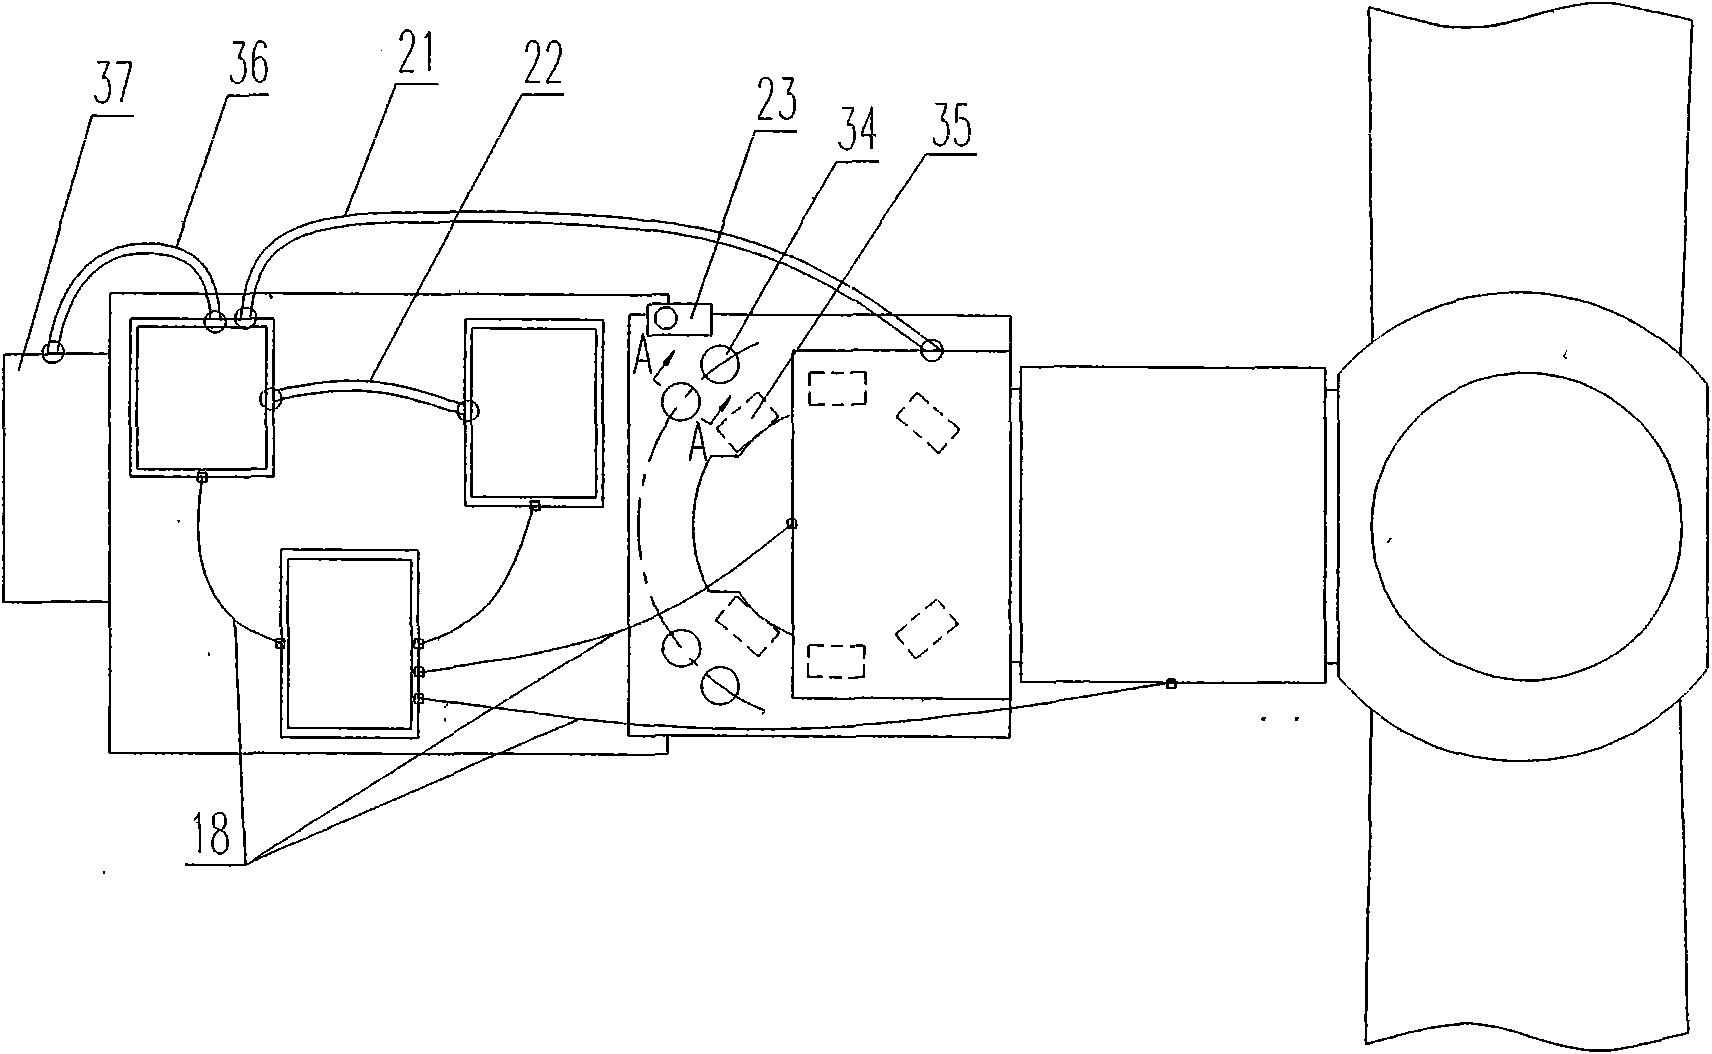 Grid-connected hybrid-driven variable-pitch variable-speed constant-frequency wind turbine generator set